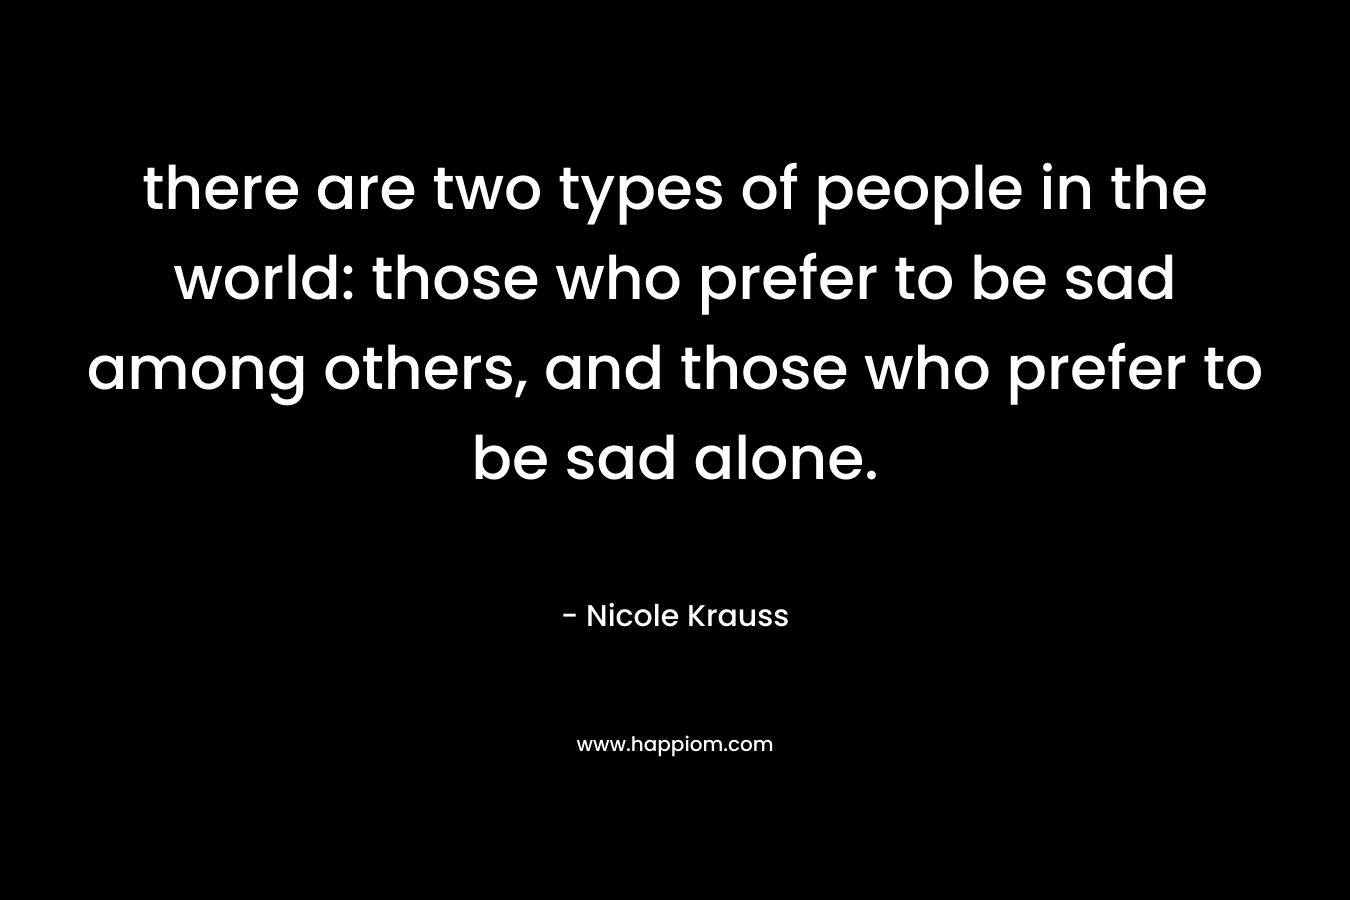 there are two types of people in the world: those who prefer to be sad among others, and those who prefer to be sad alone.